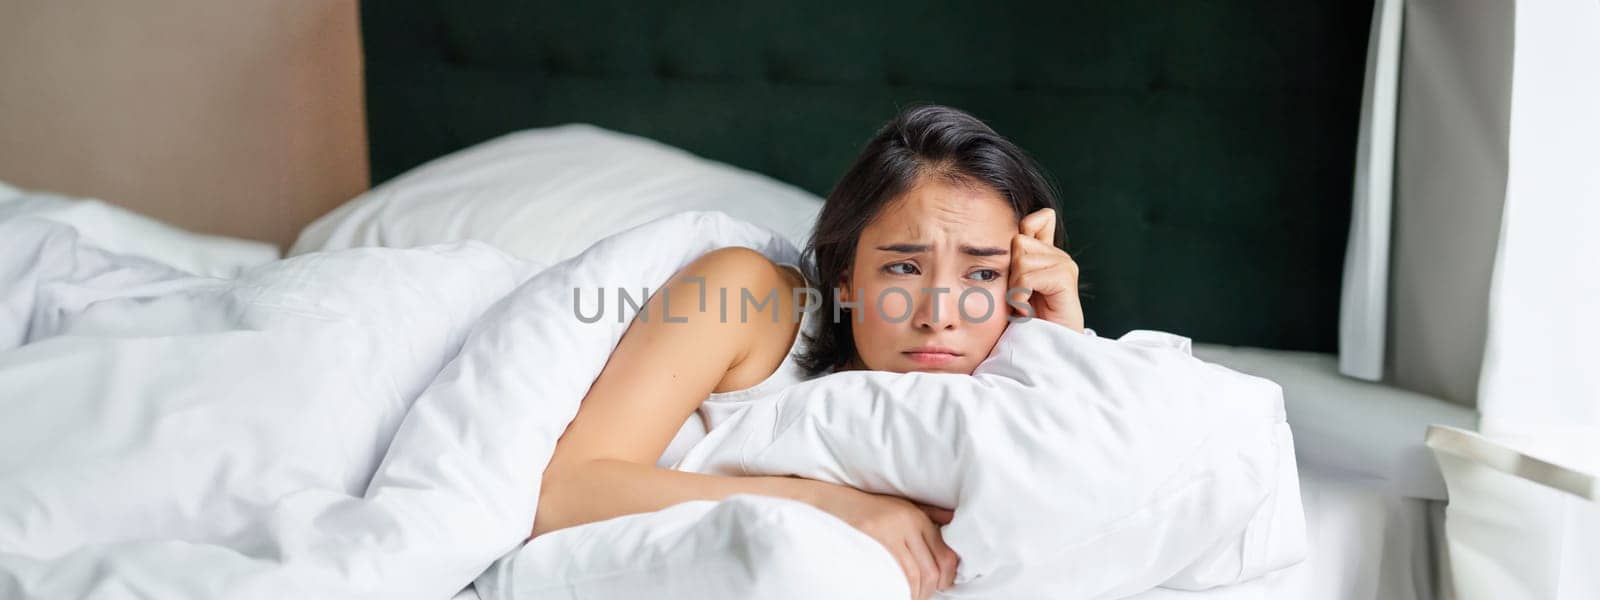 Sad and gloomy asian girl lying in her bed, grimacing and crying, feeling upset, spending time in her bedroom, hugging pillow.